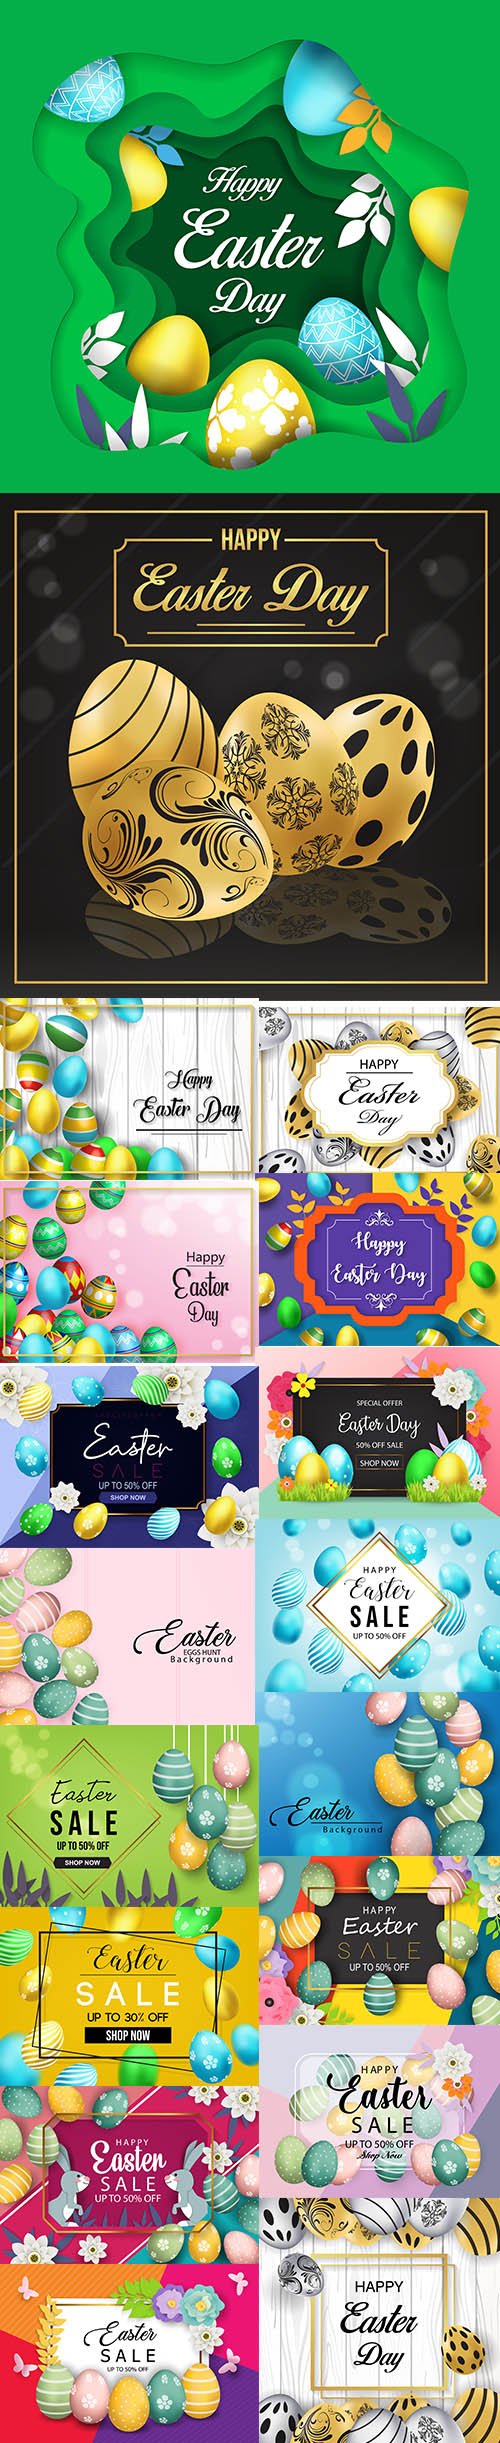 Happy Easter Luxury Backgrounds Template Pack Vol 3